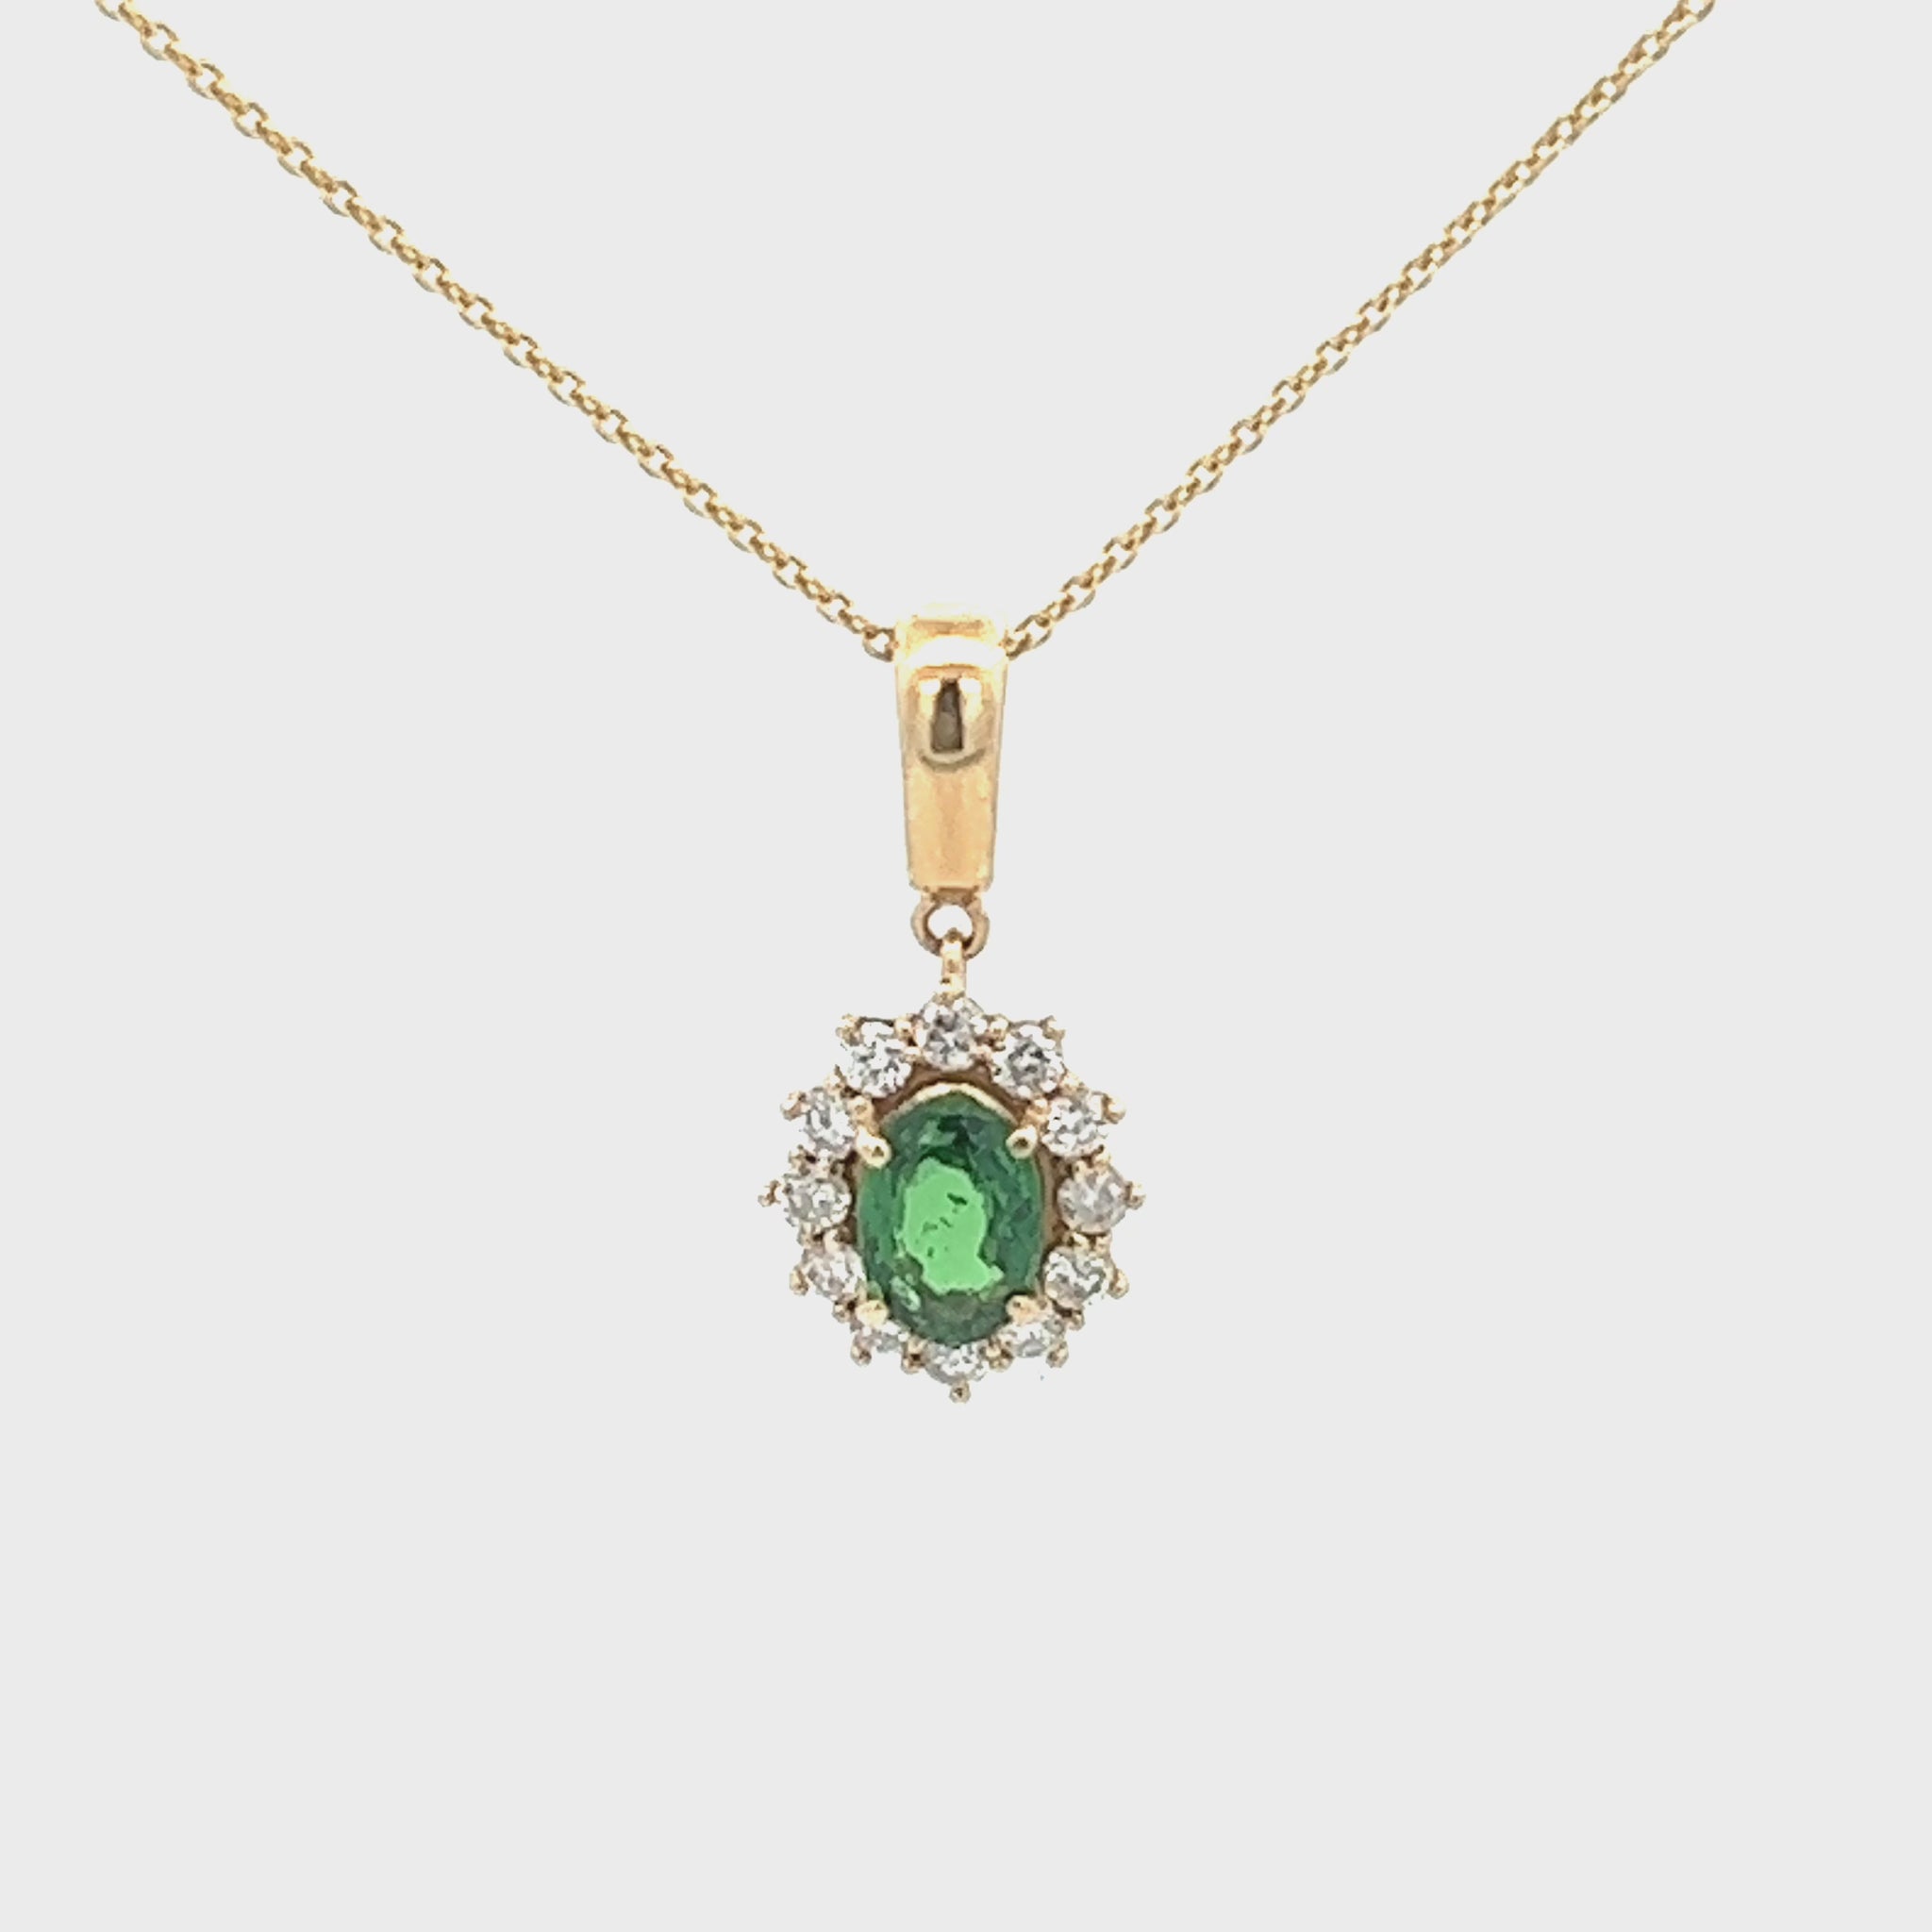 1.25cttw Emerald And Diamond Necklace 14k Gold Chain Video